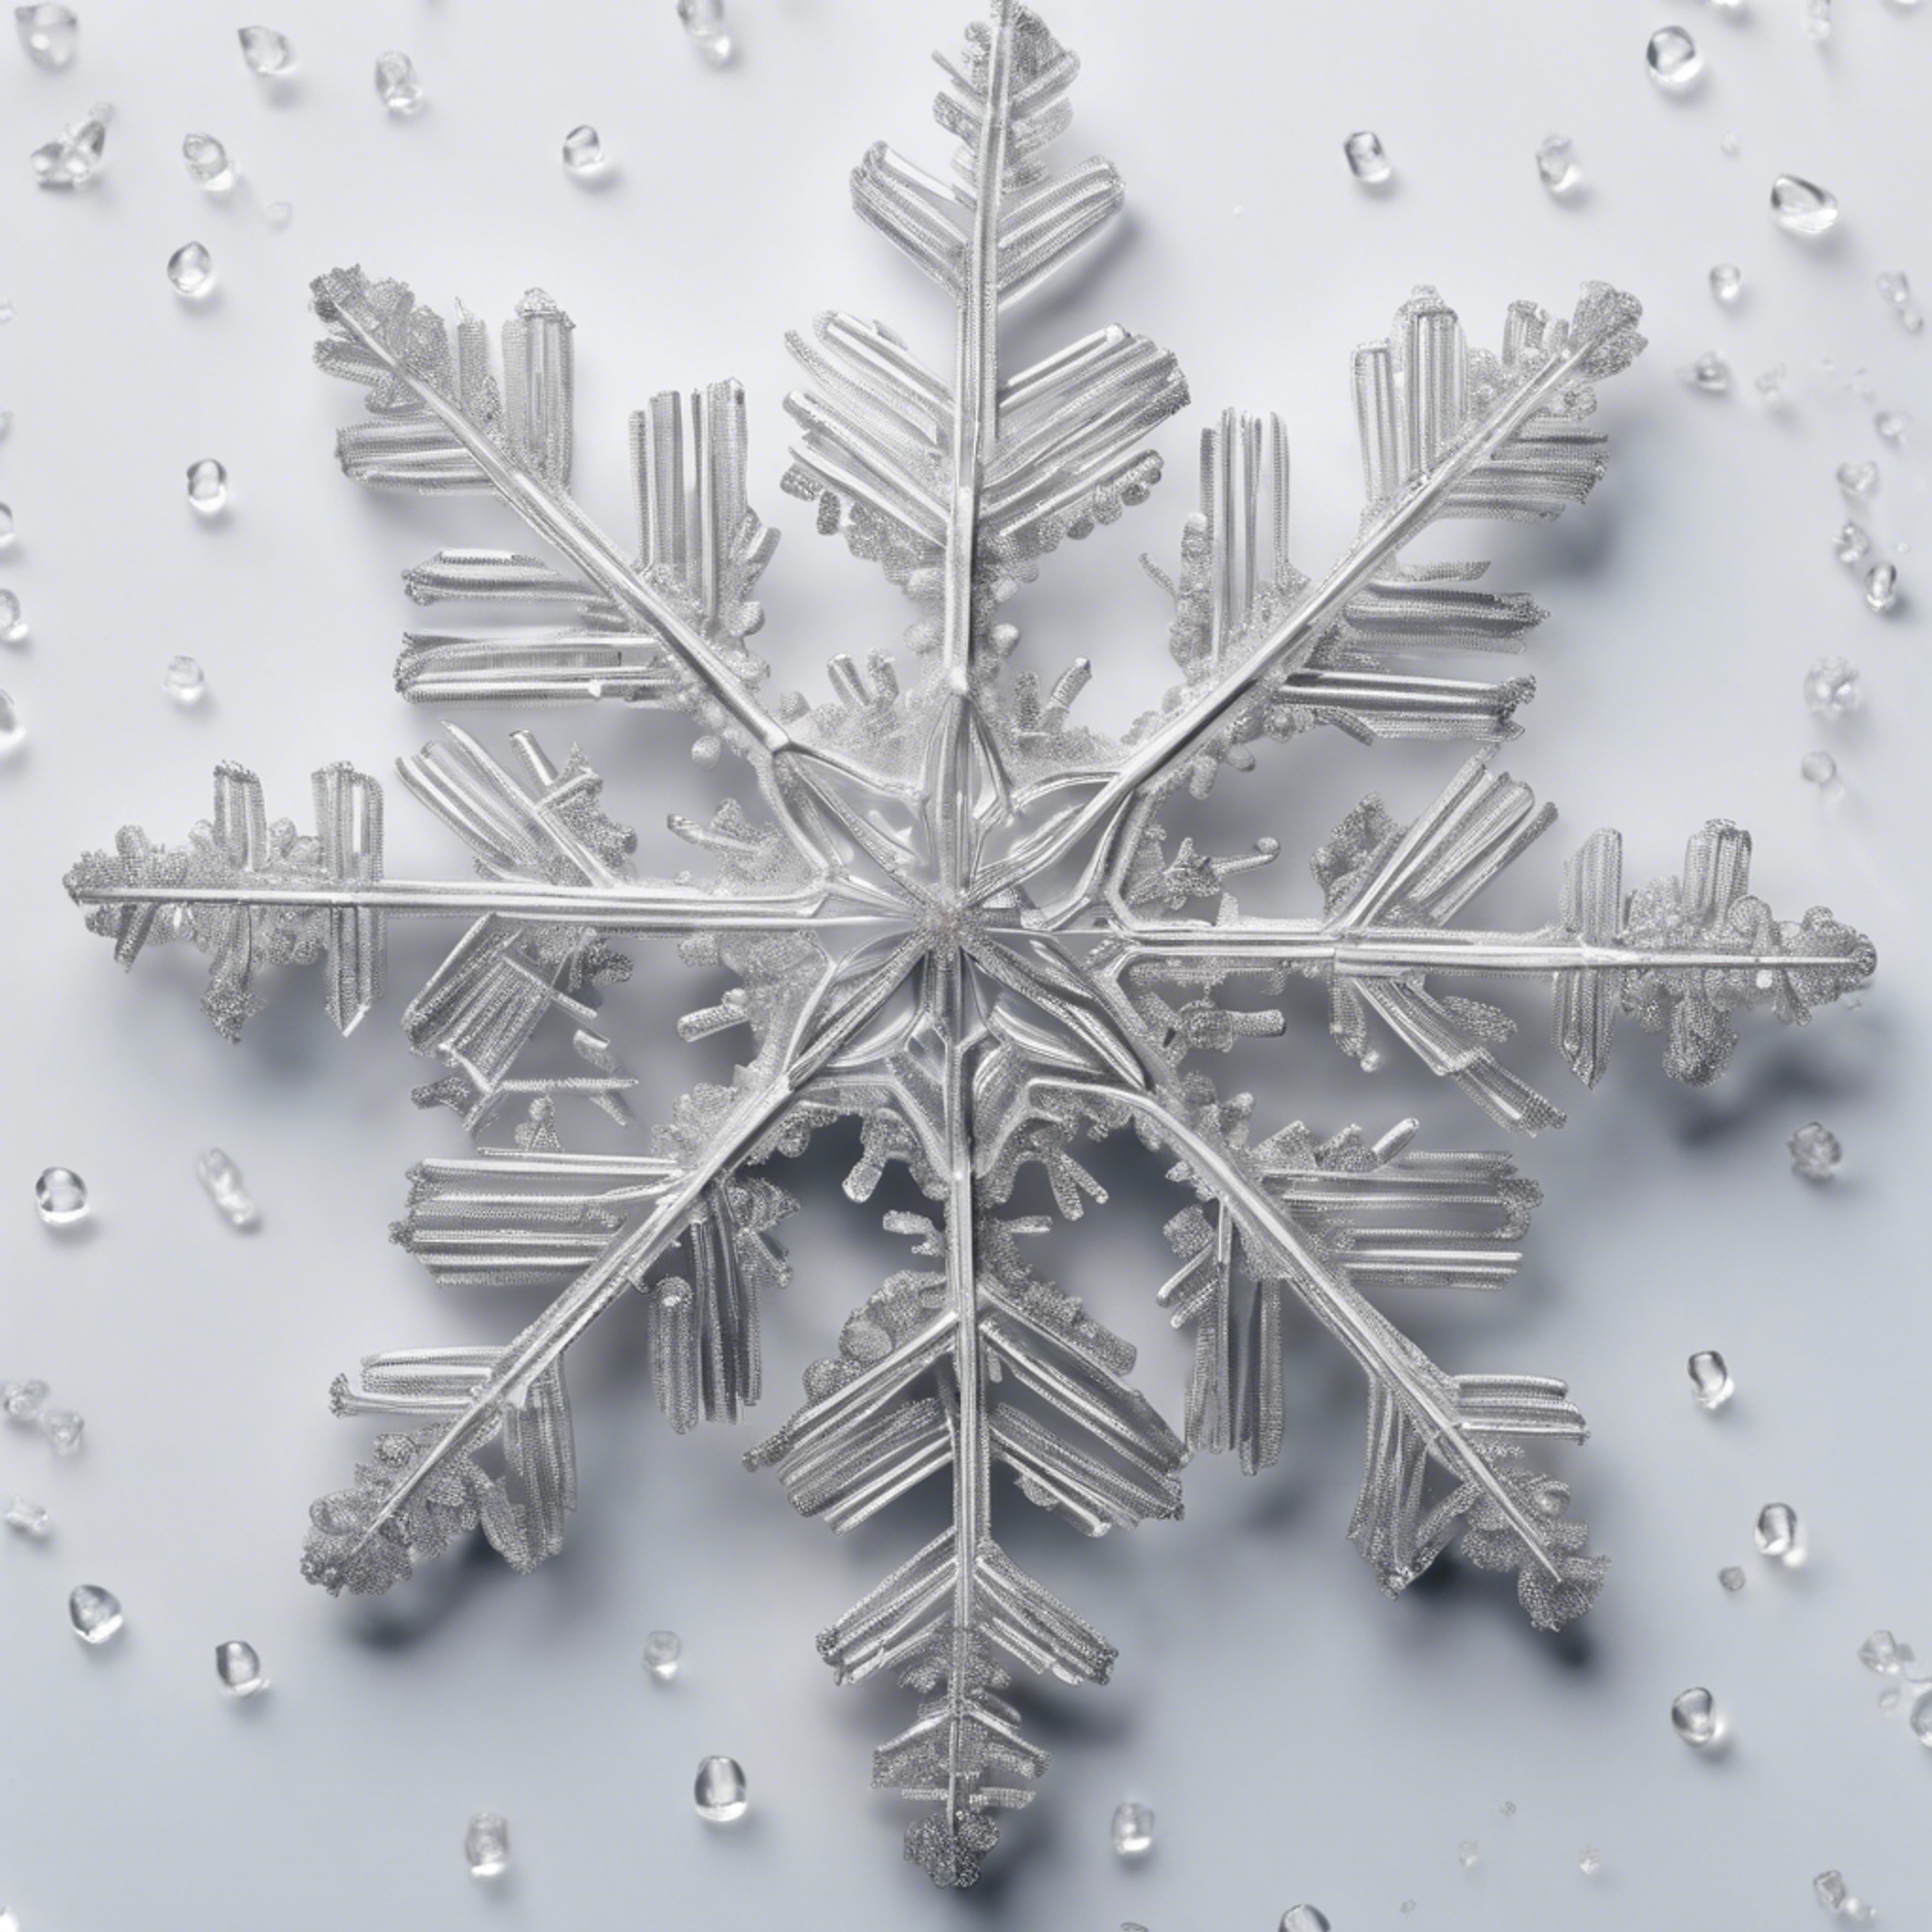 Close-up macro photography of a silver-white snowflake, intricate in detail, against a cool white background. Tapet[e4635791b5a244959ce4]